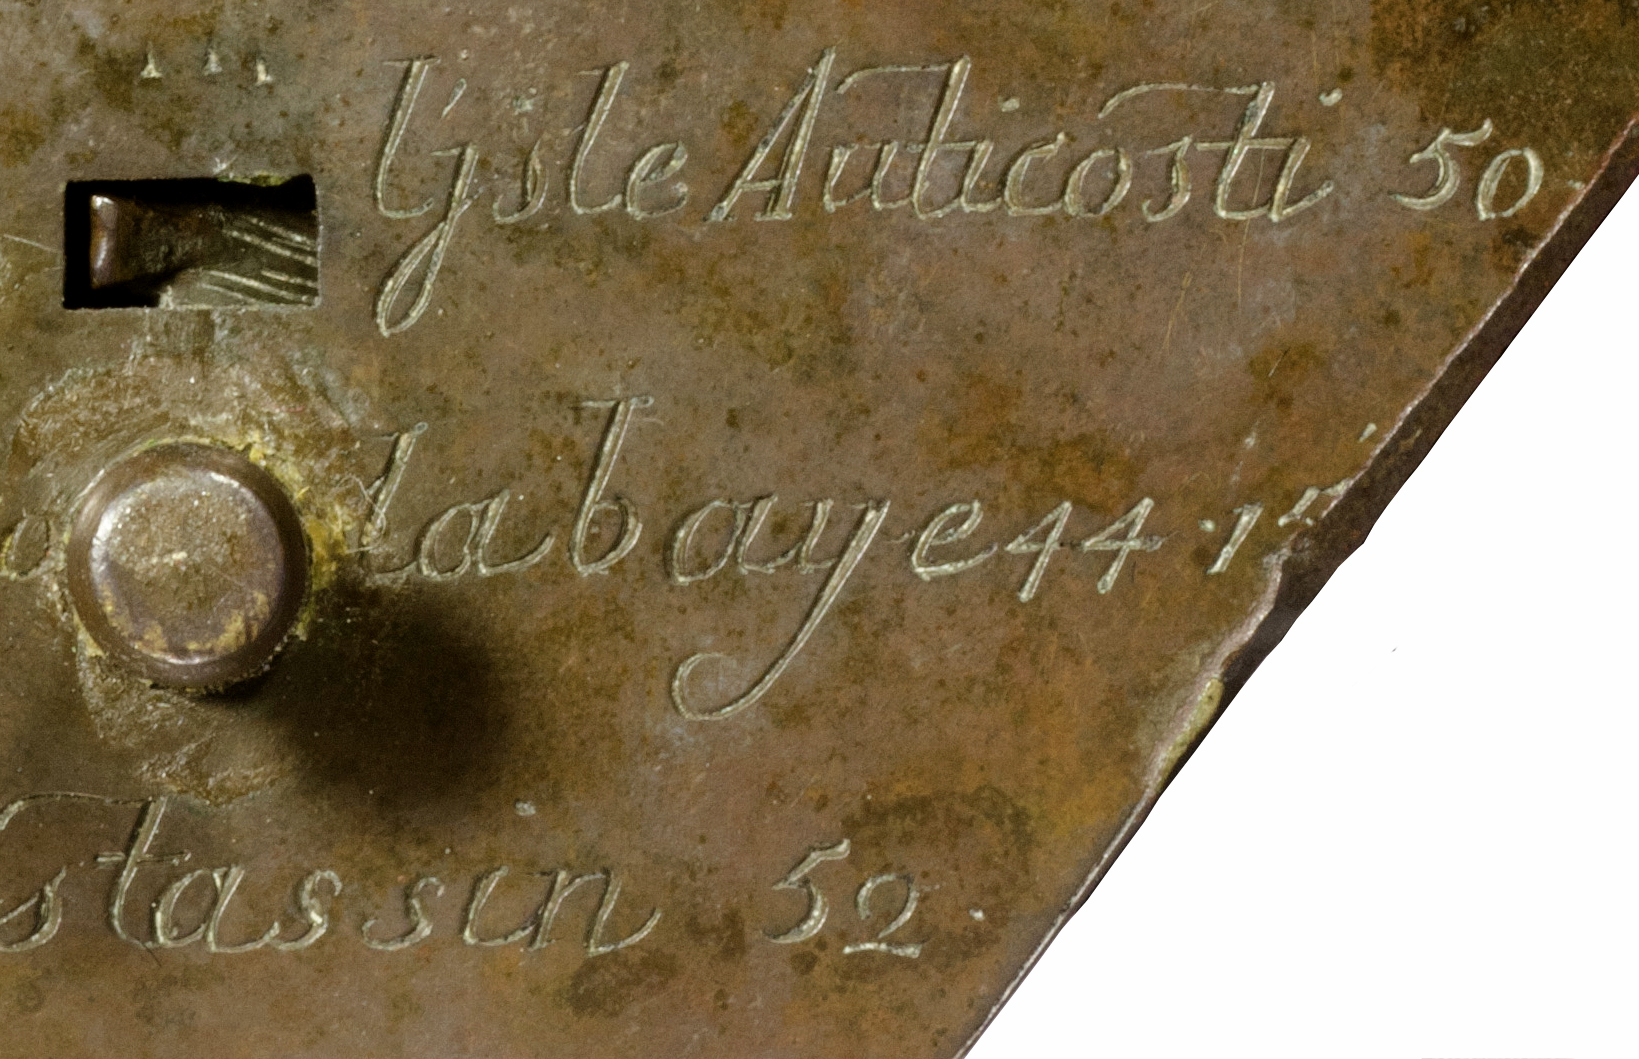 “La baye” (Green Bay) engraved on the reverse of the Le Maire Sundial-Compass. Photograph courtesy of the Neville Public Museum of Brown County.